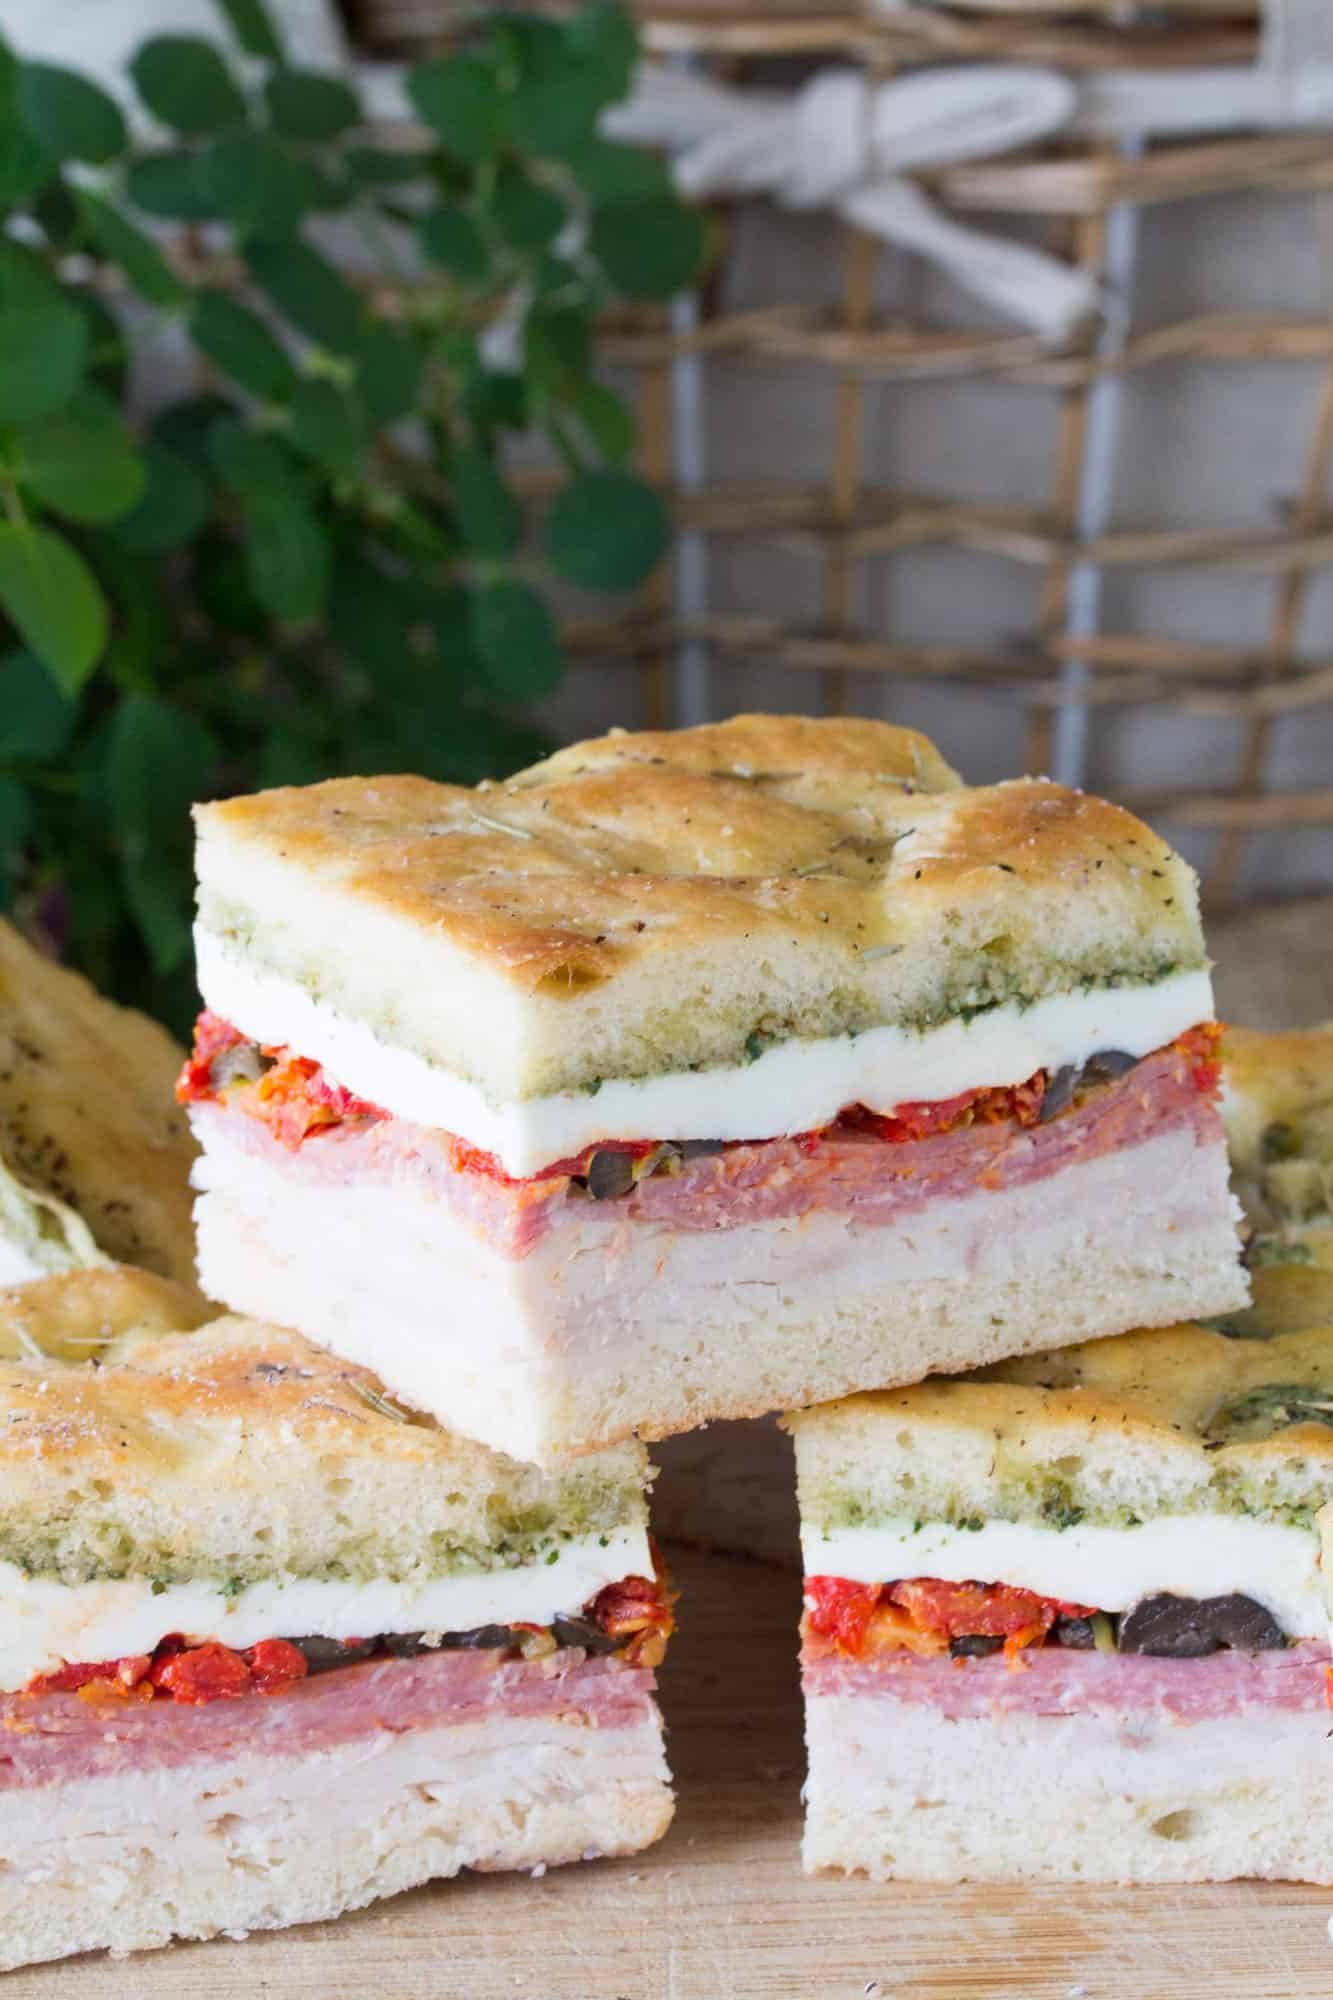 A stack of three Pressed Italian Sandwichs made of sliced chicken breast, sliced salami, sundried tomatoes, olives, pepperocinis, red bell peppers, and fresh mozzarella with a pesto sauce\.